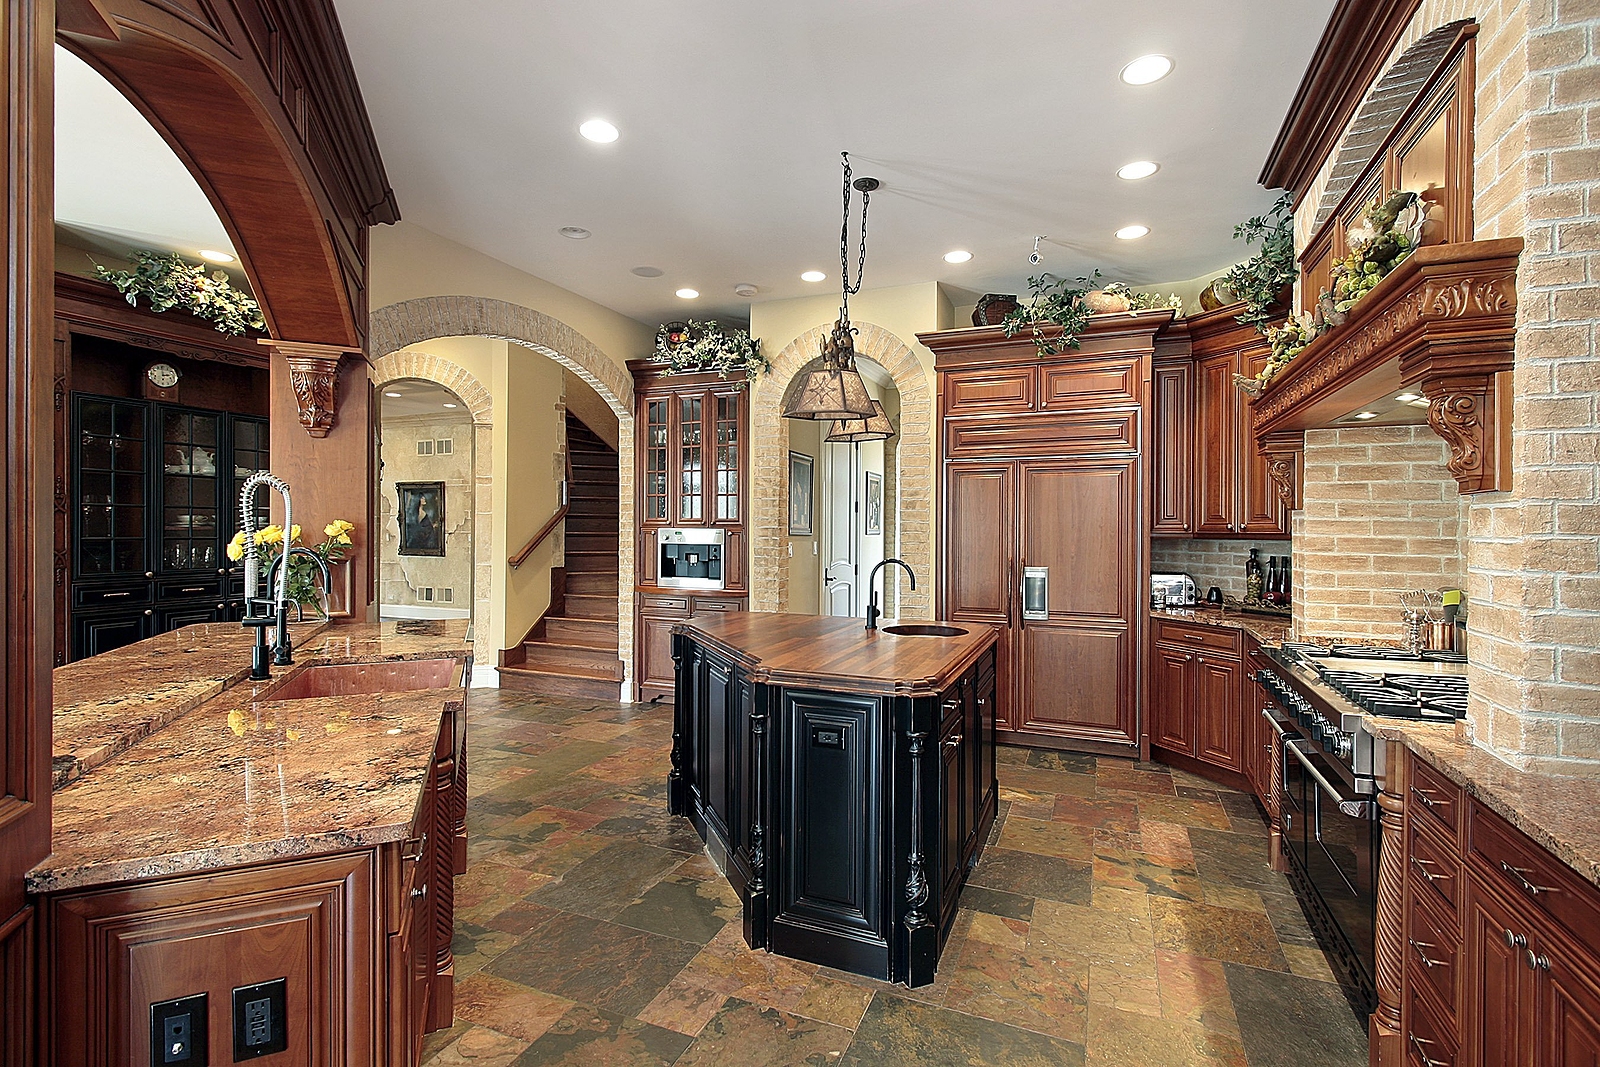 https://www.cabinetdoors.com/product_images/uploaded_images/bigstock-elegant-kitchen-with-cherry-ca-16567436.jpg